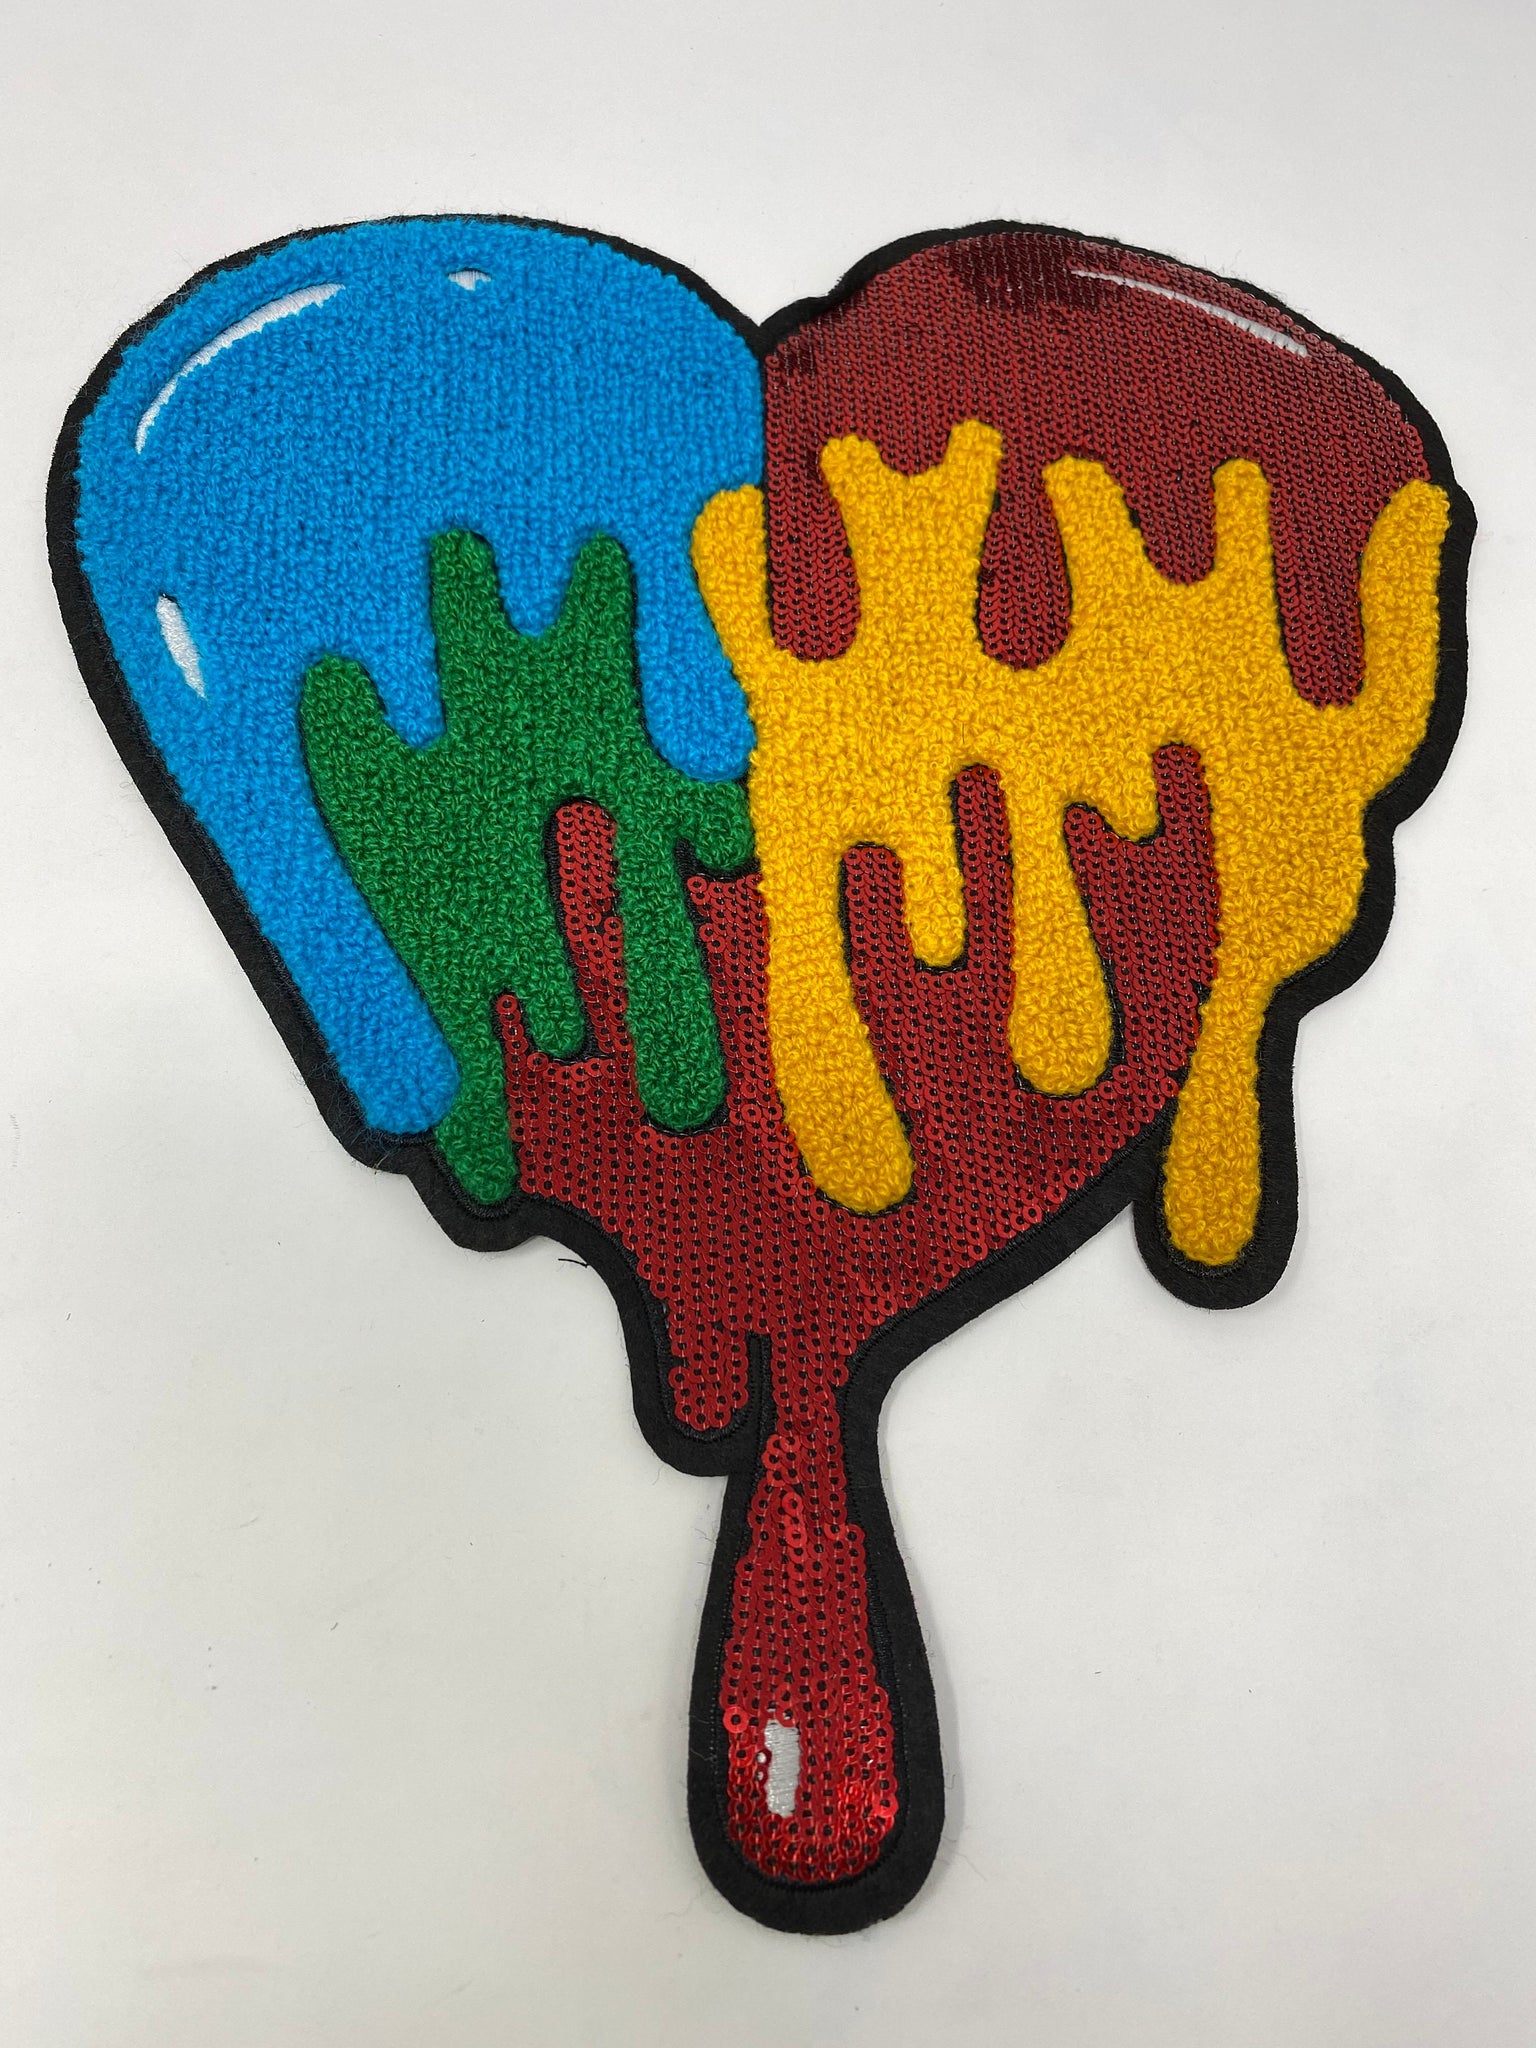 Vibrant 1-pc Chenille Patch "Colorful Dripping Heart " Patch (sew-on) Size 9X11", Exclusive Chenille Patch, Denim Jacket, Shirts, & Hoodies